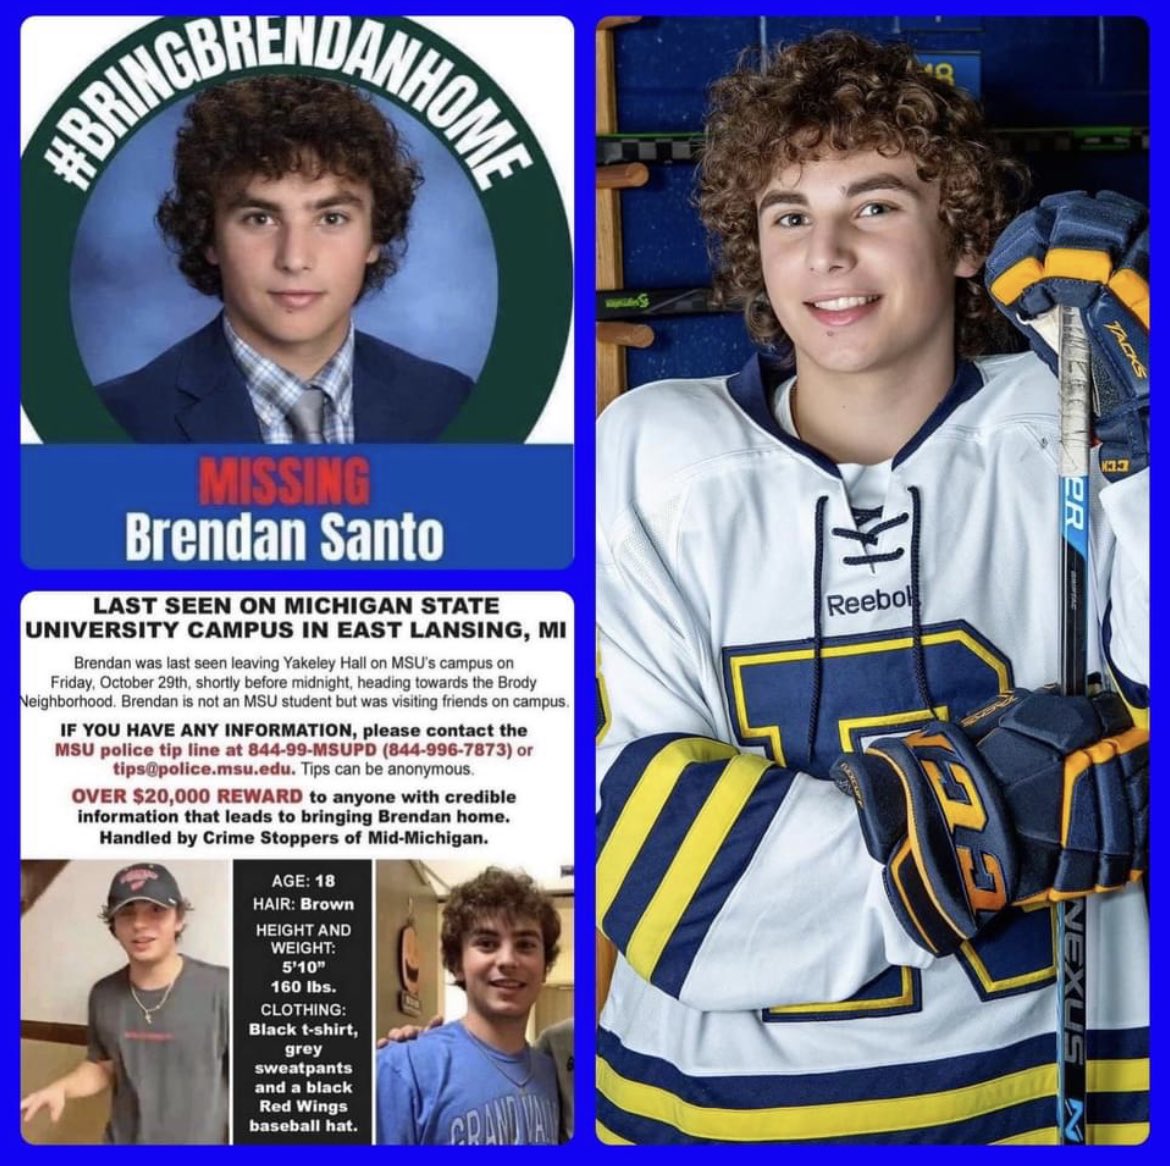 Please share. Brendan has been missing since October 29th. This anguish is too much for any family to take. Retweet and help the Santo family.